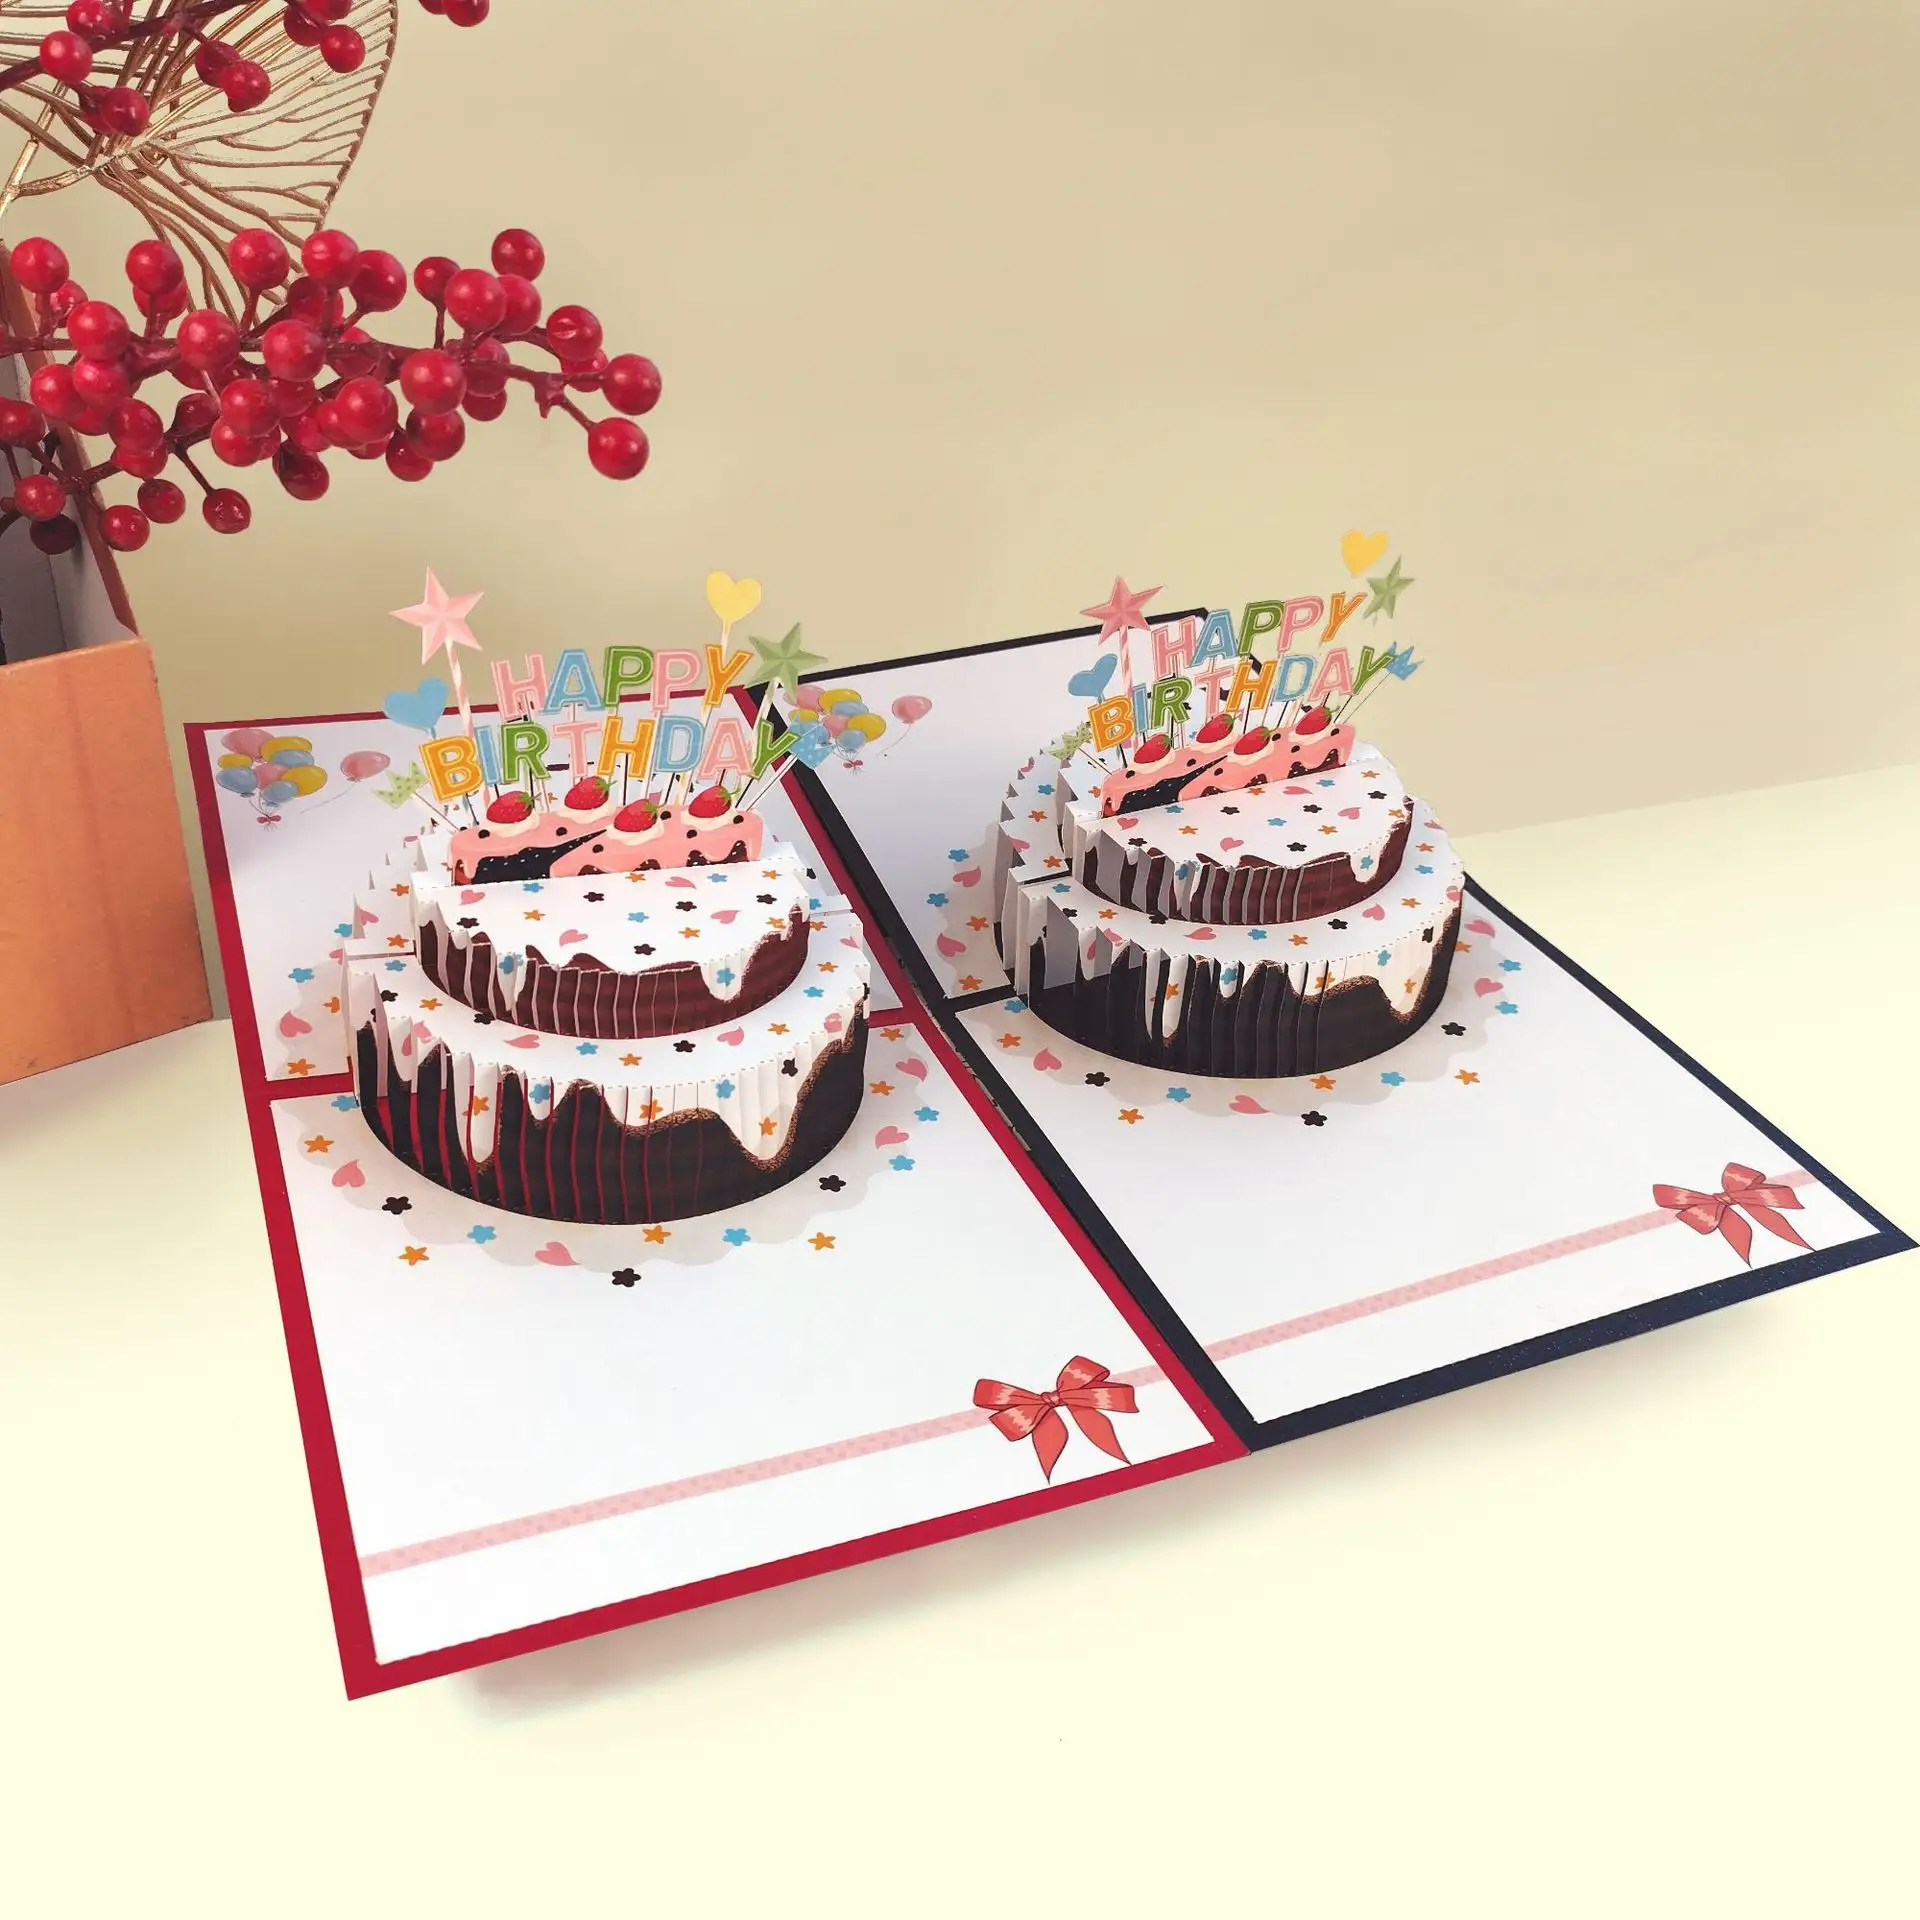 Customize Creative Wishes Greeting Card Pop Up Cake 3D Birthday Bronzing Deluxe Happy Birthday Greets Cards